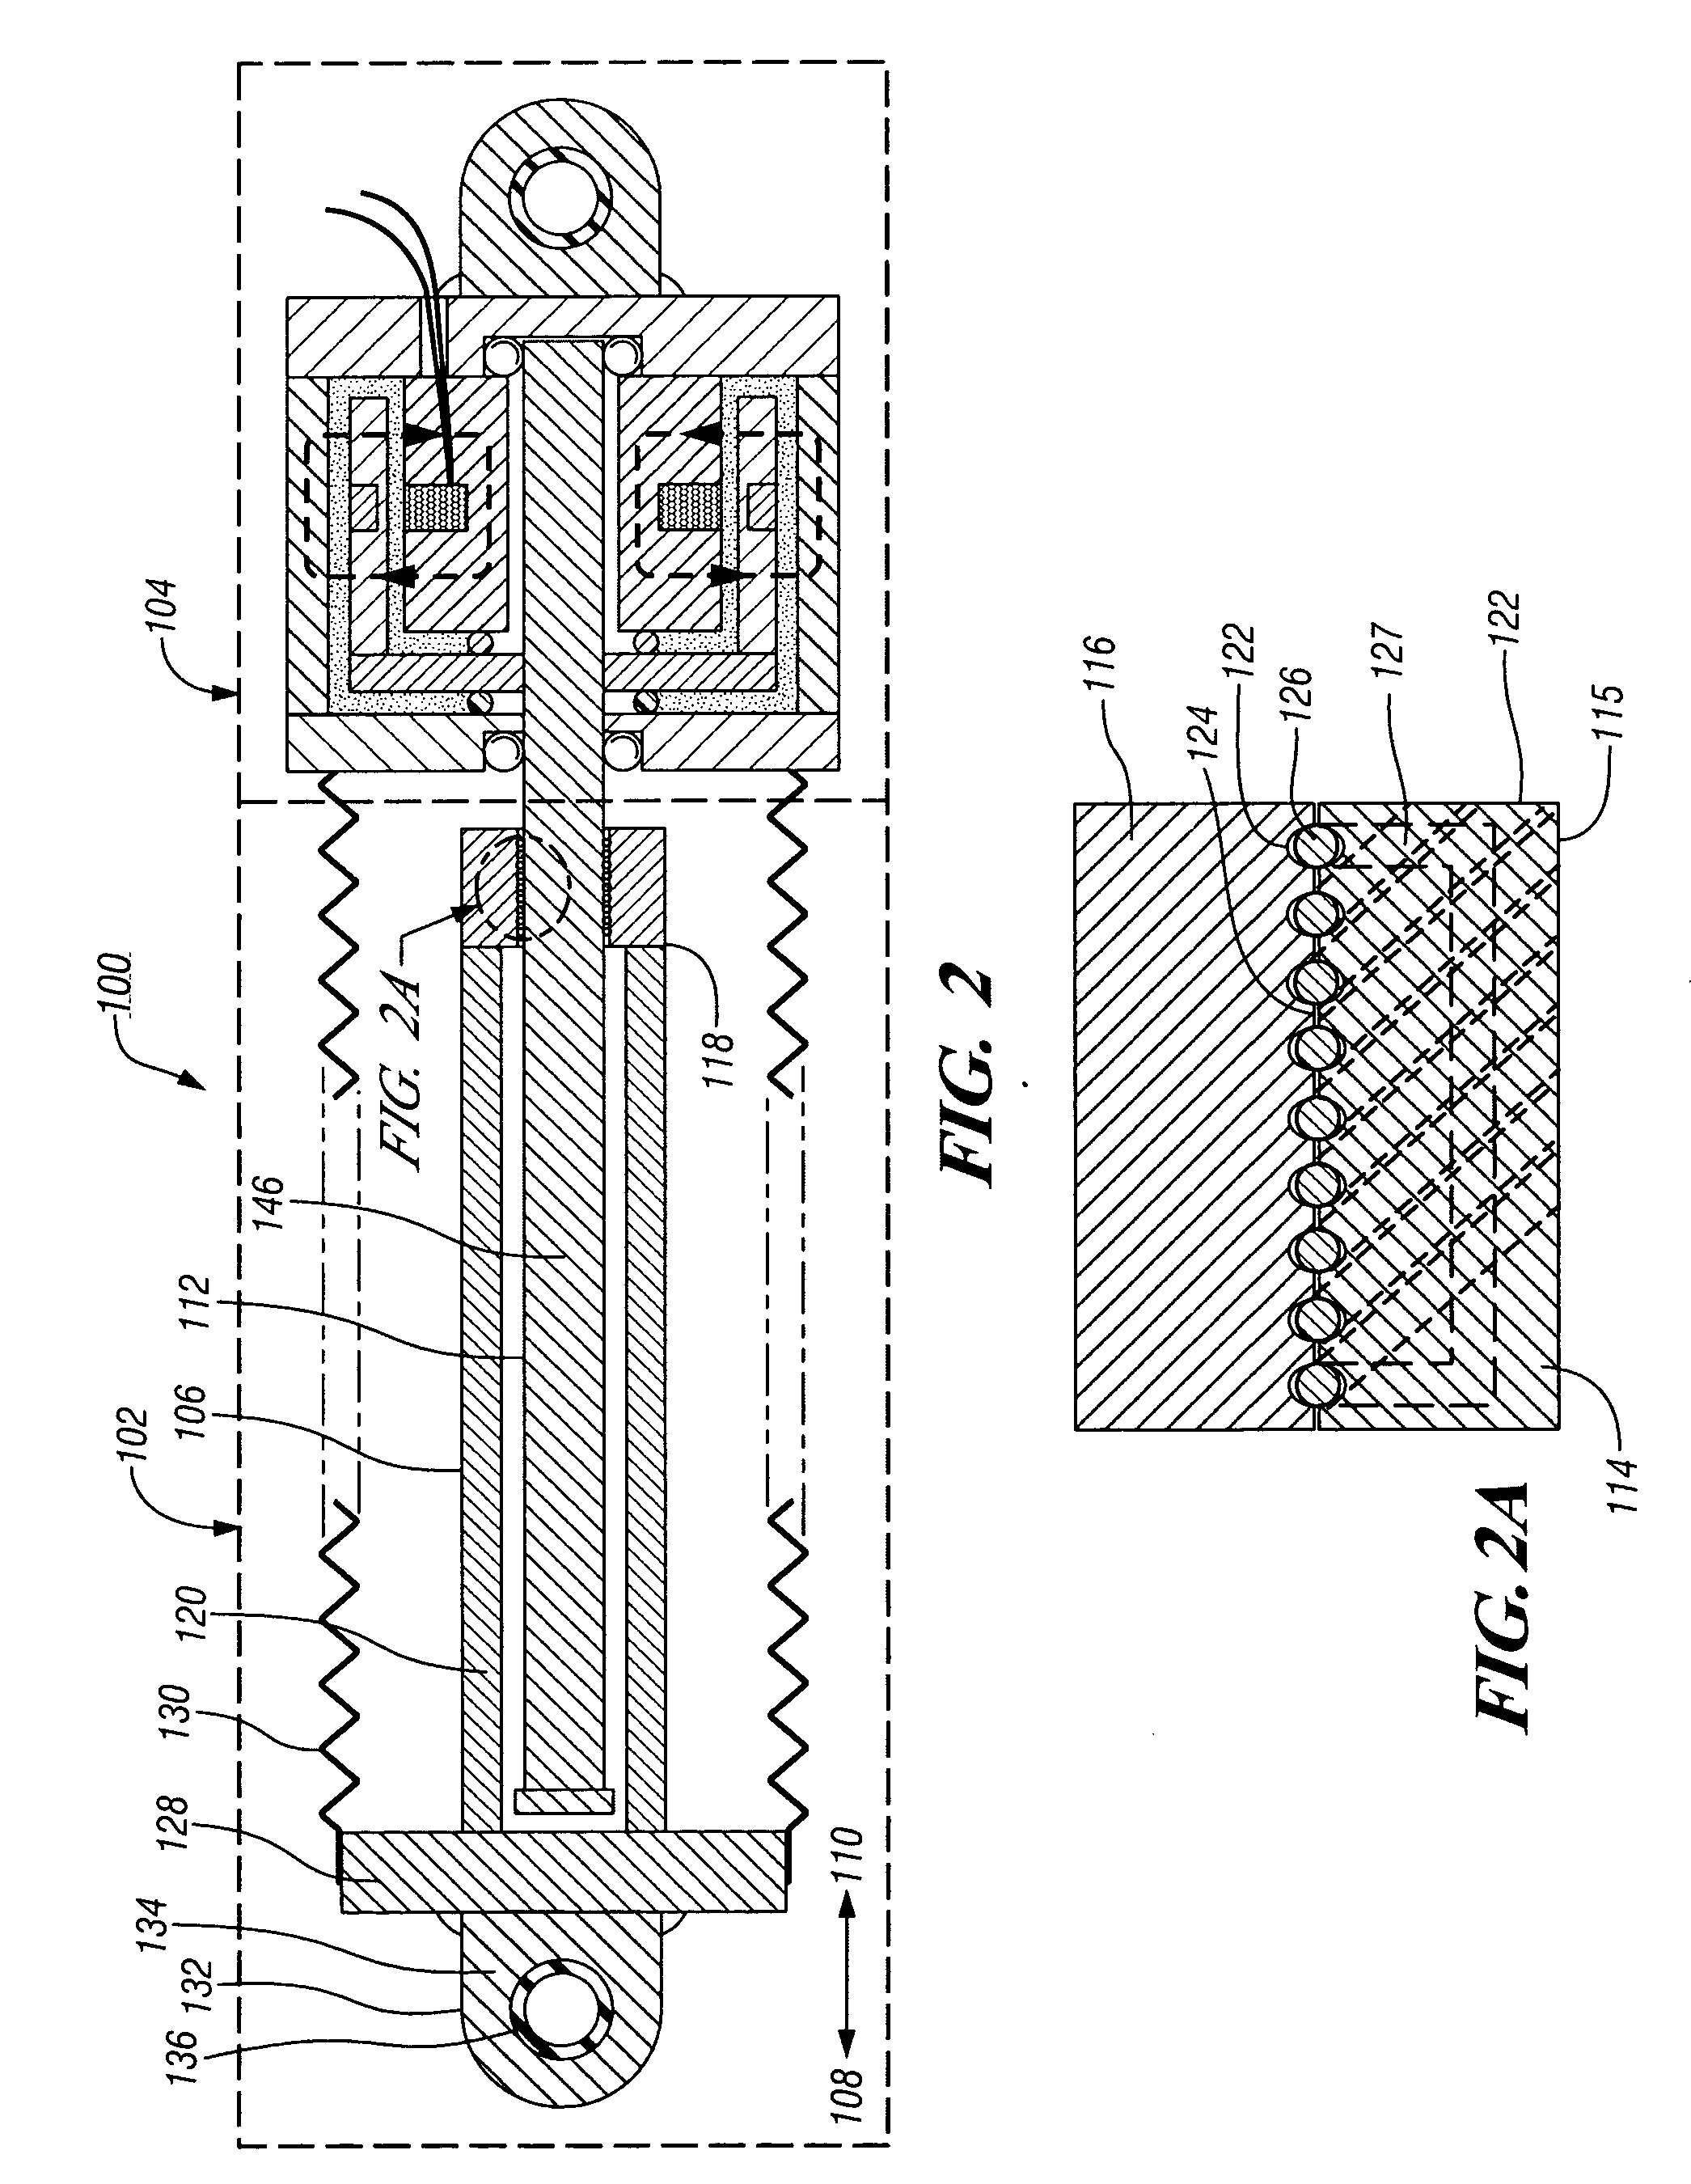 Fluid damper having continuously variable damping response